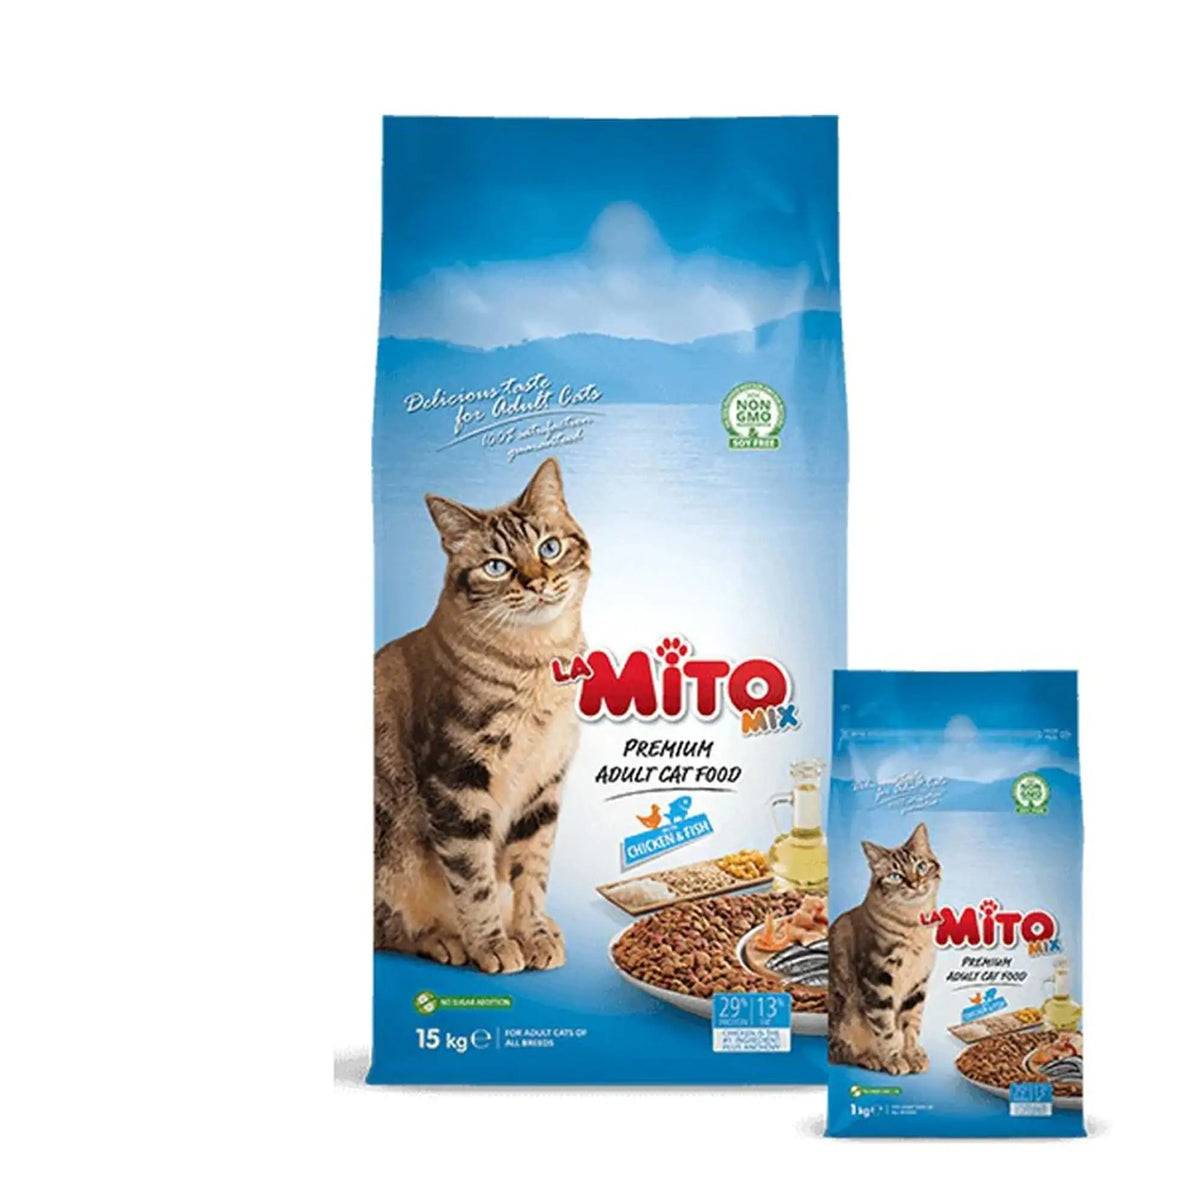 Mito Mix Chicken and Fish Adult Cat Food 15kg